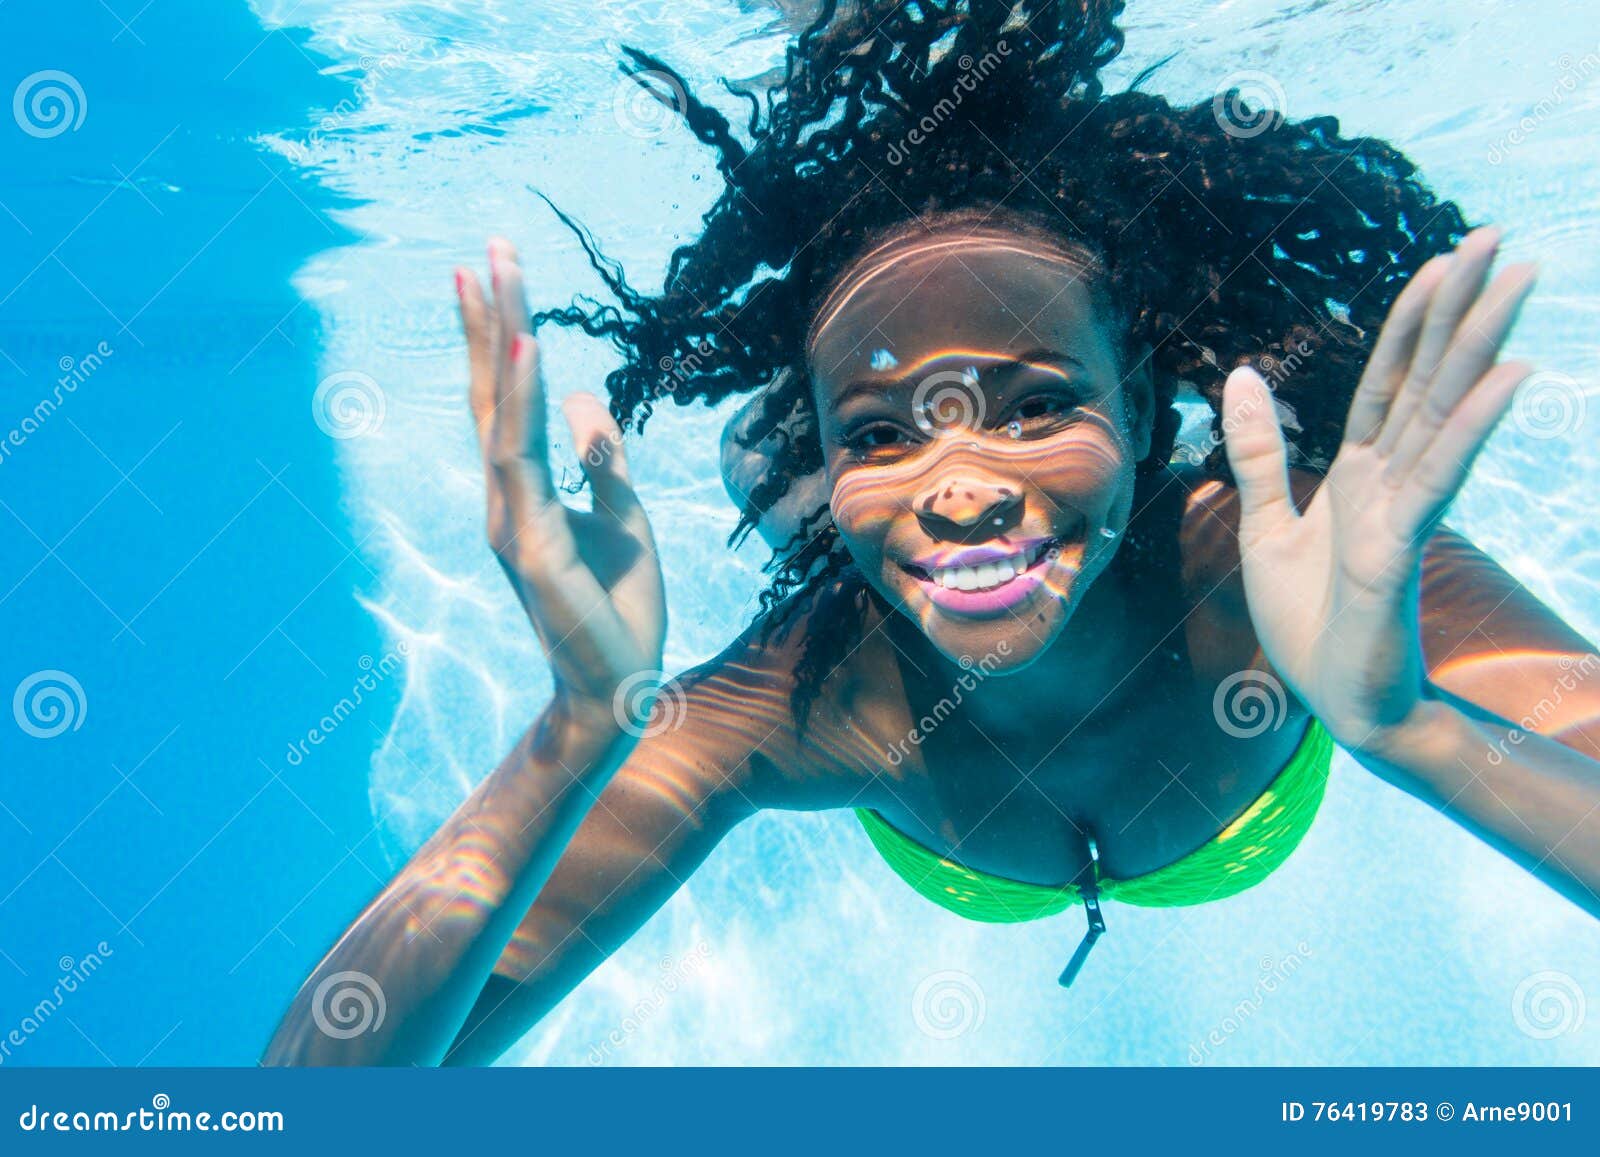 black girl diving in swimming pool at vacation